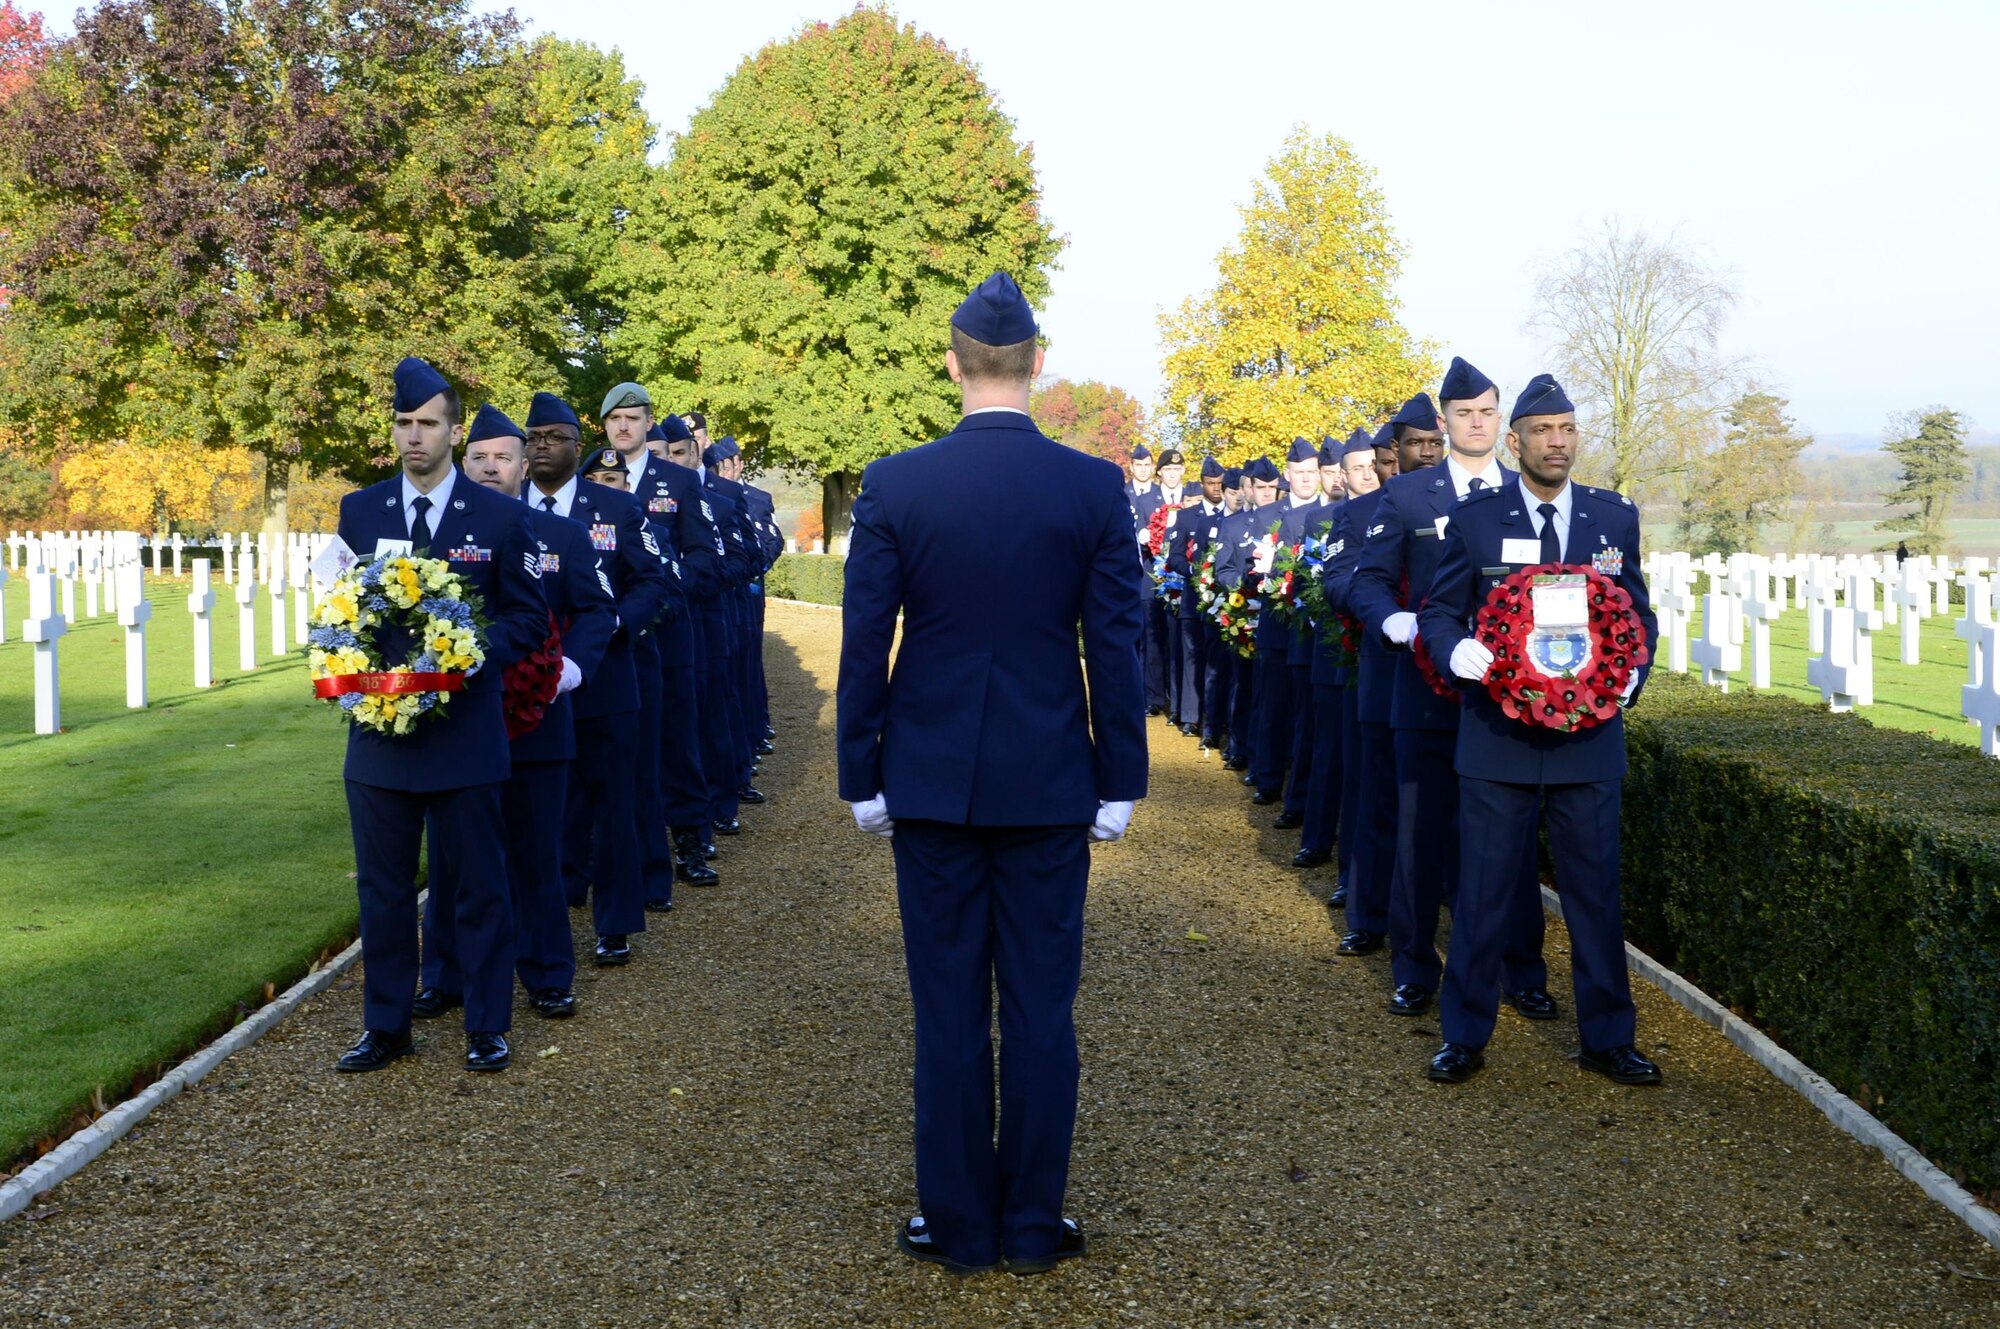 U.S. Air Force Airmen act as wreath bearers during a Veterans Day ceremony at the Cambridge American Cemetery in Cambridge, England, Nov. 11. Distinguished visitors and veterans were invited to participate in the ceremony by placing wreathes along the Tablets of the Missing. (U.S. Air Force photo/Senior Airman Malcolm Mayfield)
